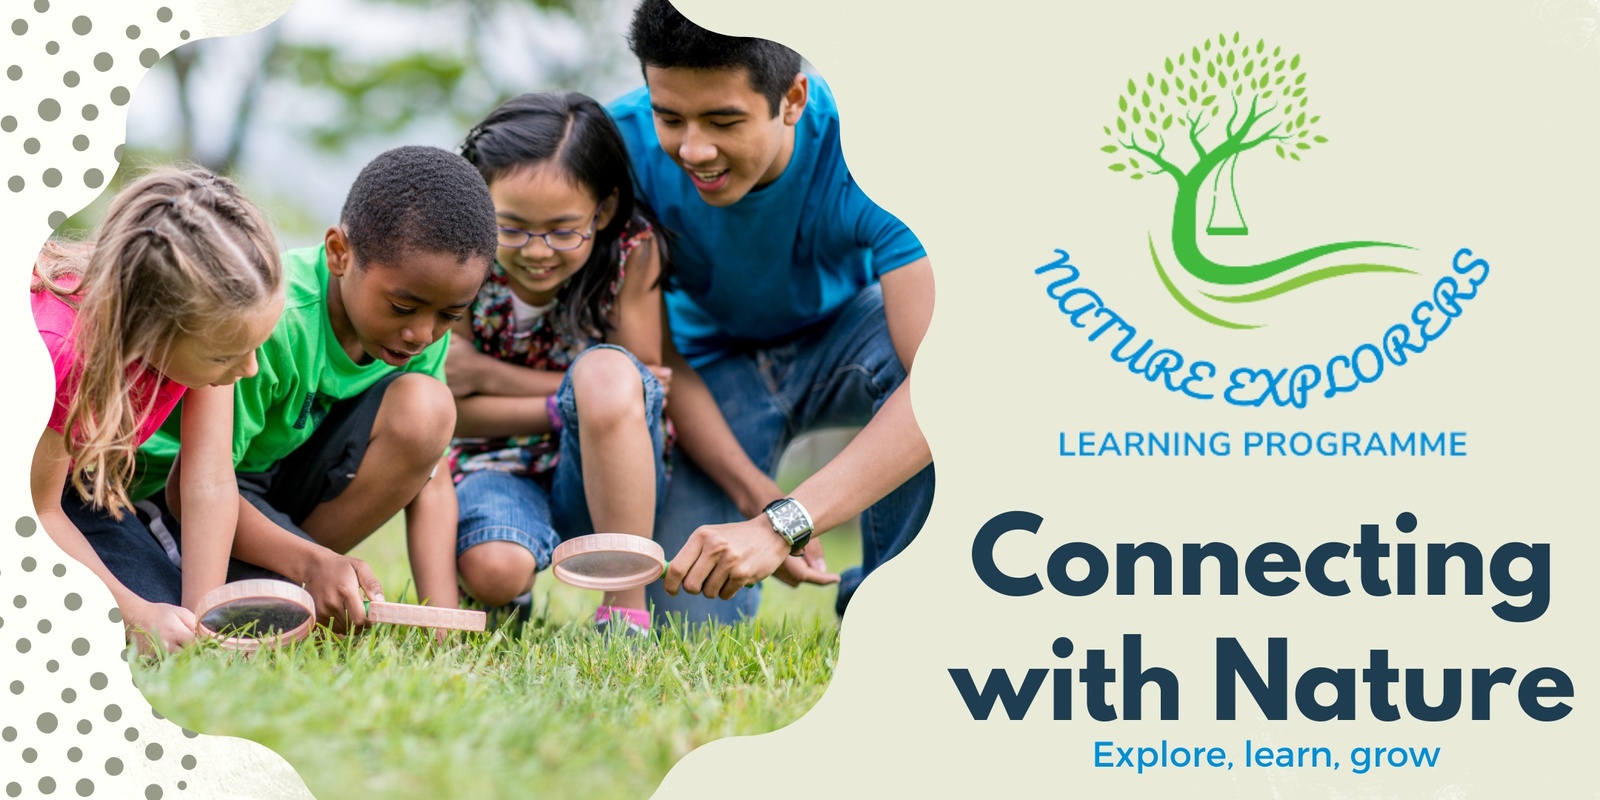 Banner image for Nature Explorers Learning Programme